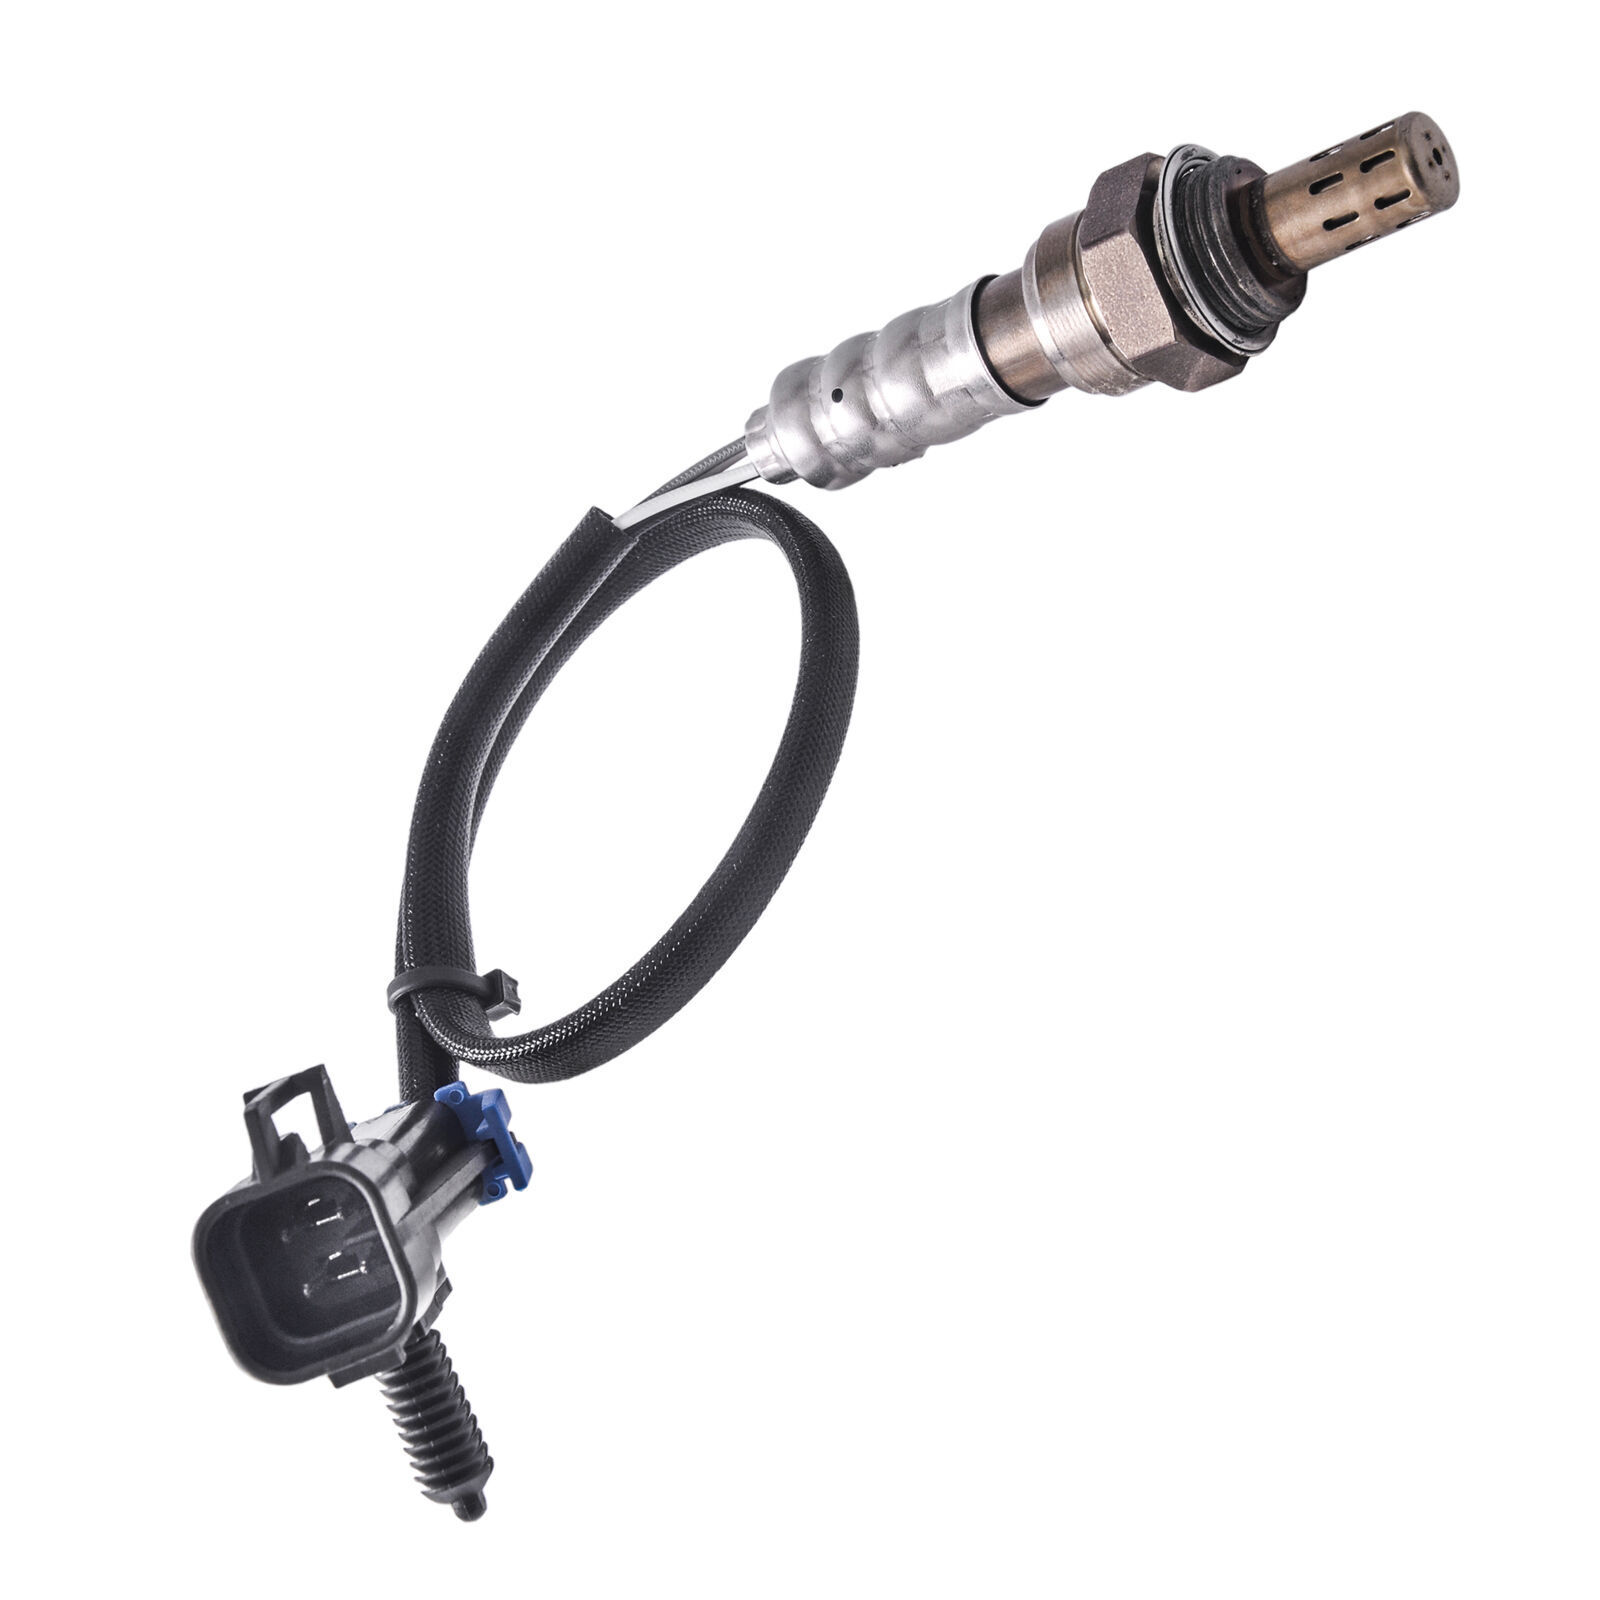 New Herko Automotive Oxygen Sensor OX010 FOR BUICK 97-03 AND CADILLAC 96-02